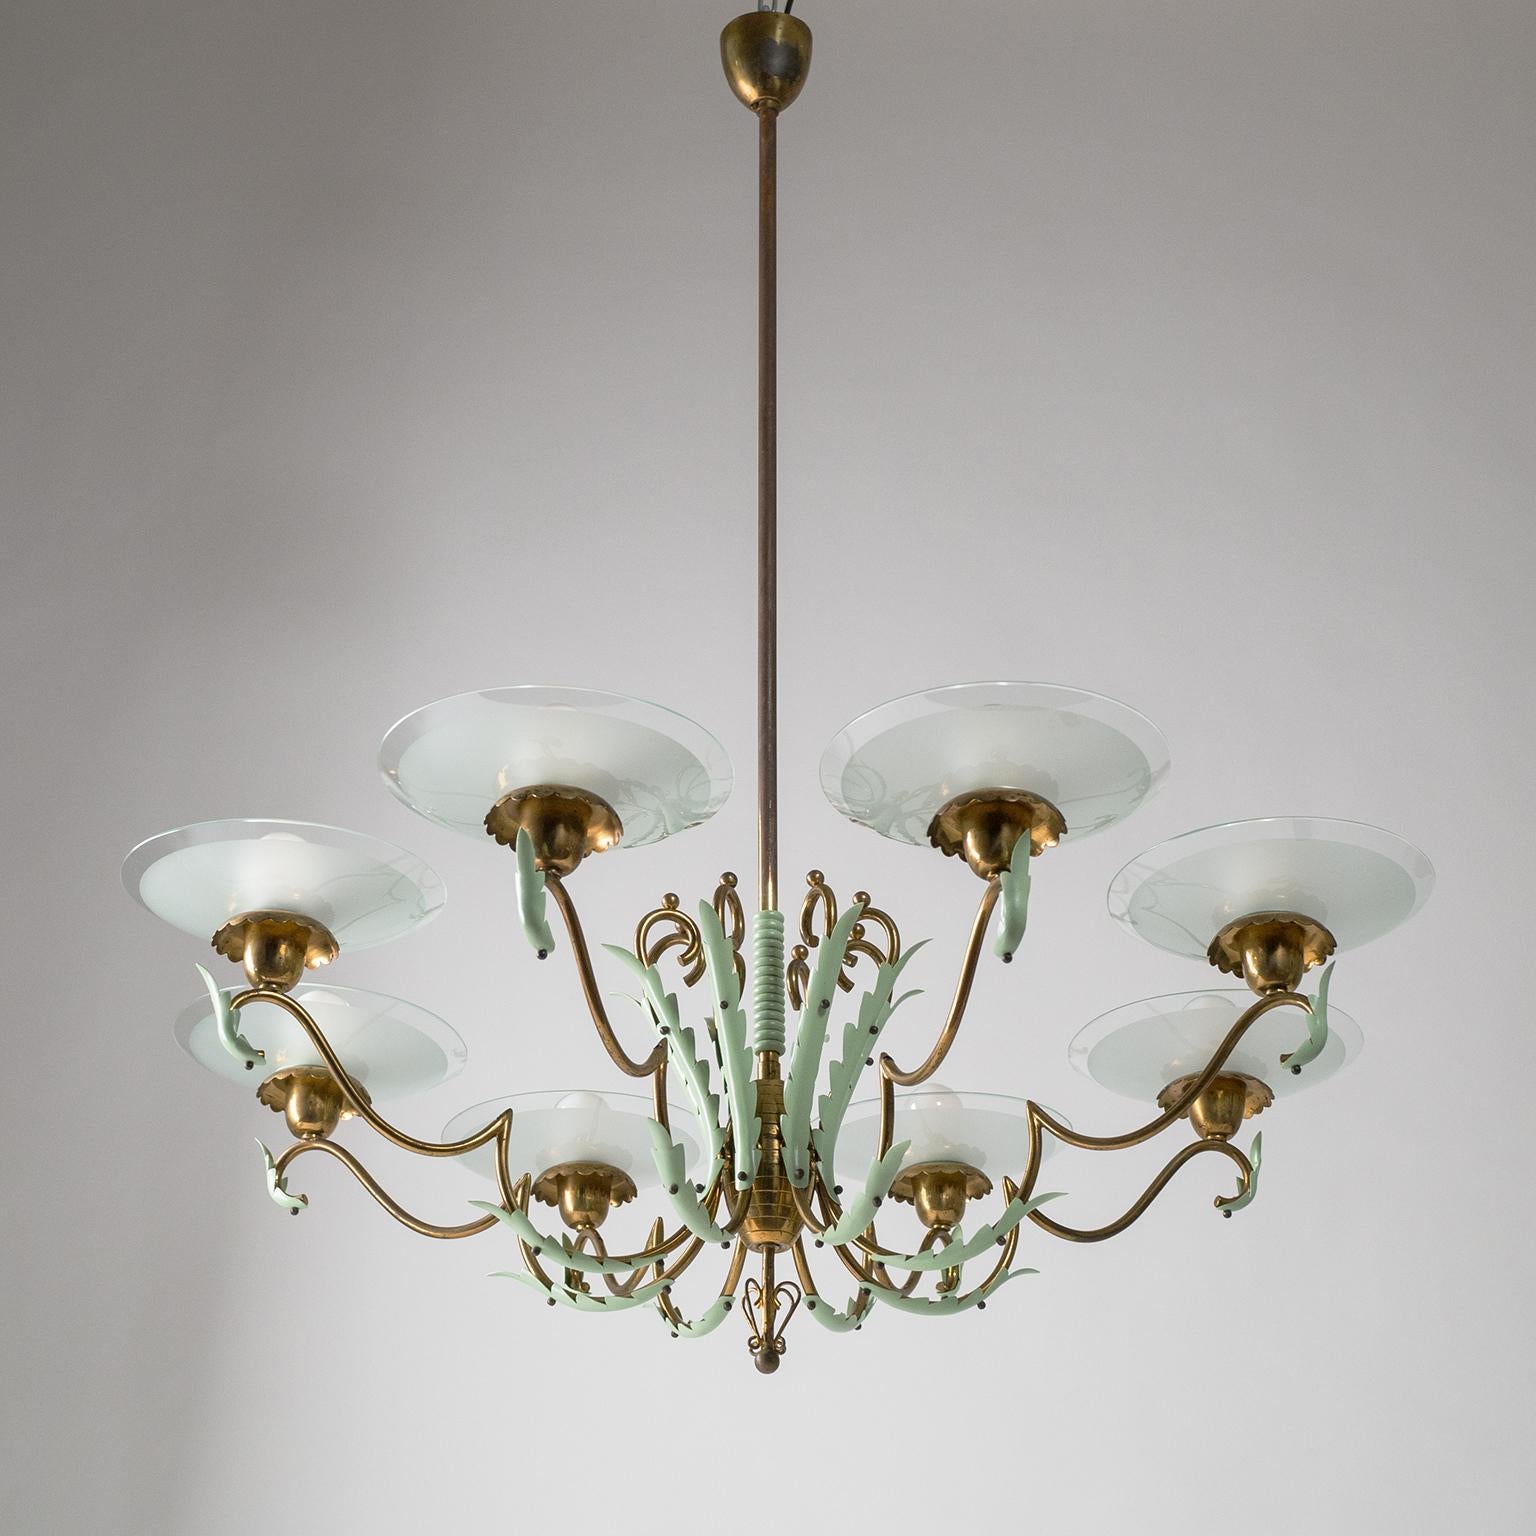 Rare Italian Art Deco eight-arm chandelier from the 1940s by Strada Milano. Elaborately curved brass arms are decorated with mint lacquered leaf-like details. Each arm culminates in a floral brass socket cover with a partially frosted glass dish.